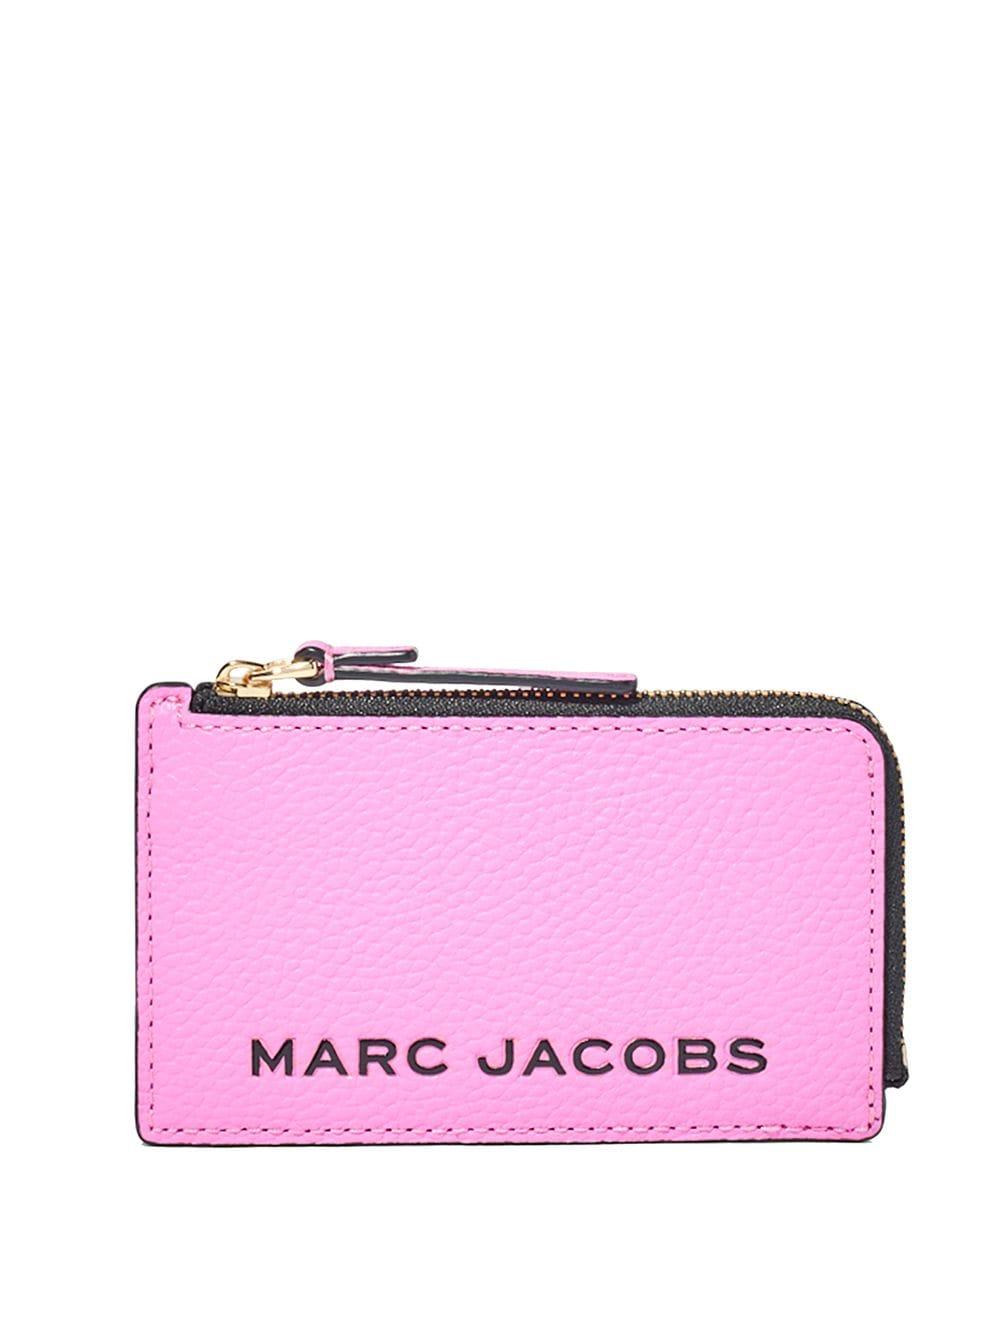 Marc Jacobs Small The Bold Top Zip Wallet in Pink | Lyst